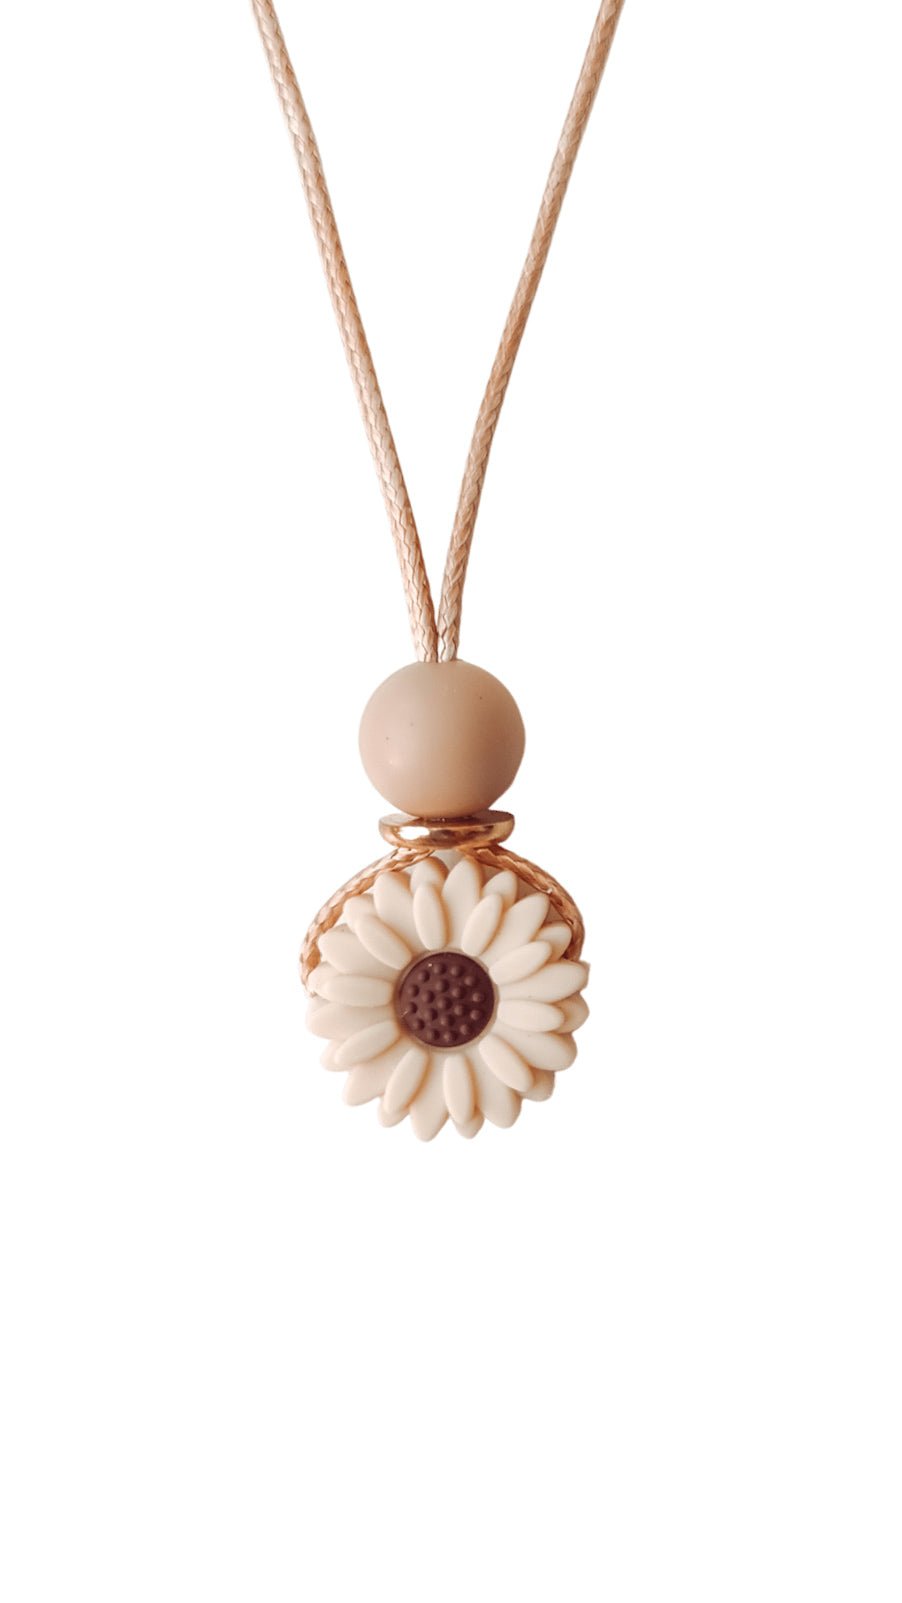 Dainty Daisy necklace in cream with gold detail